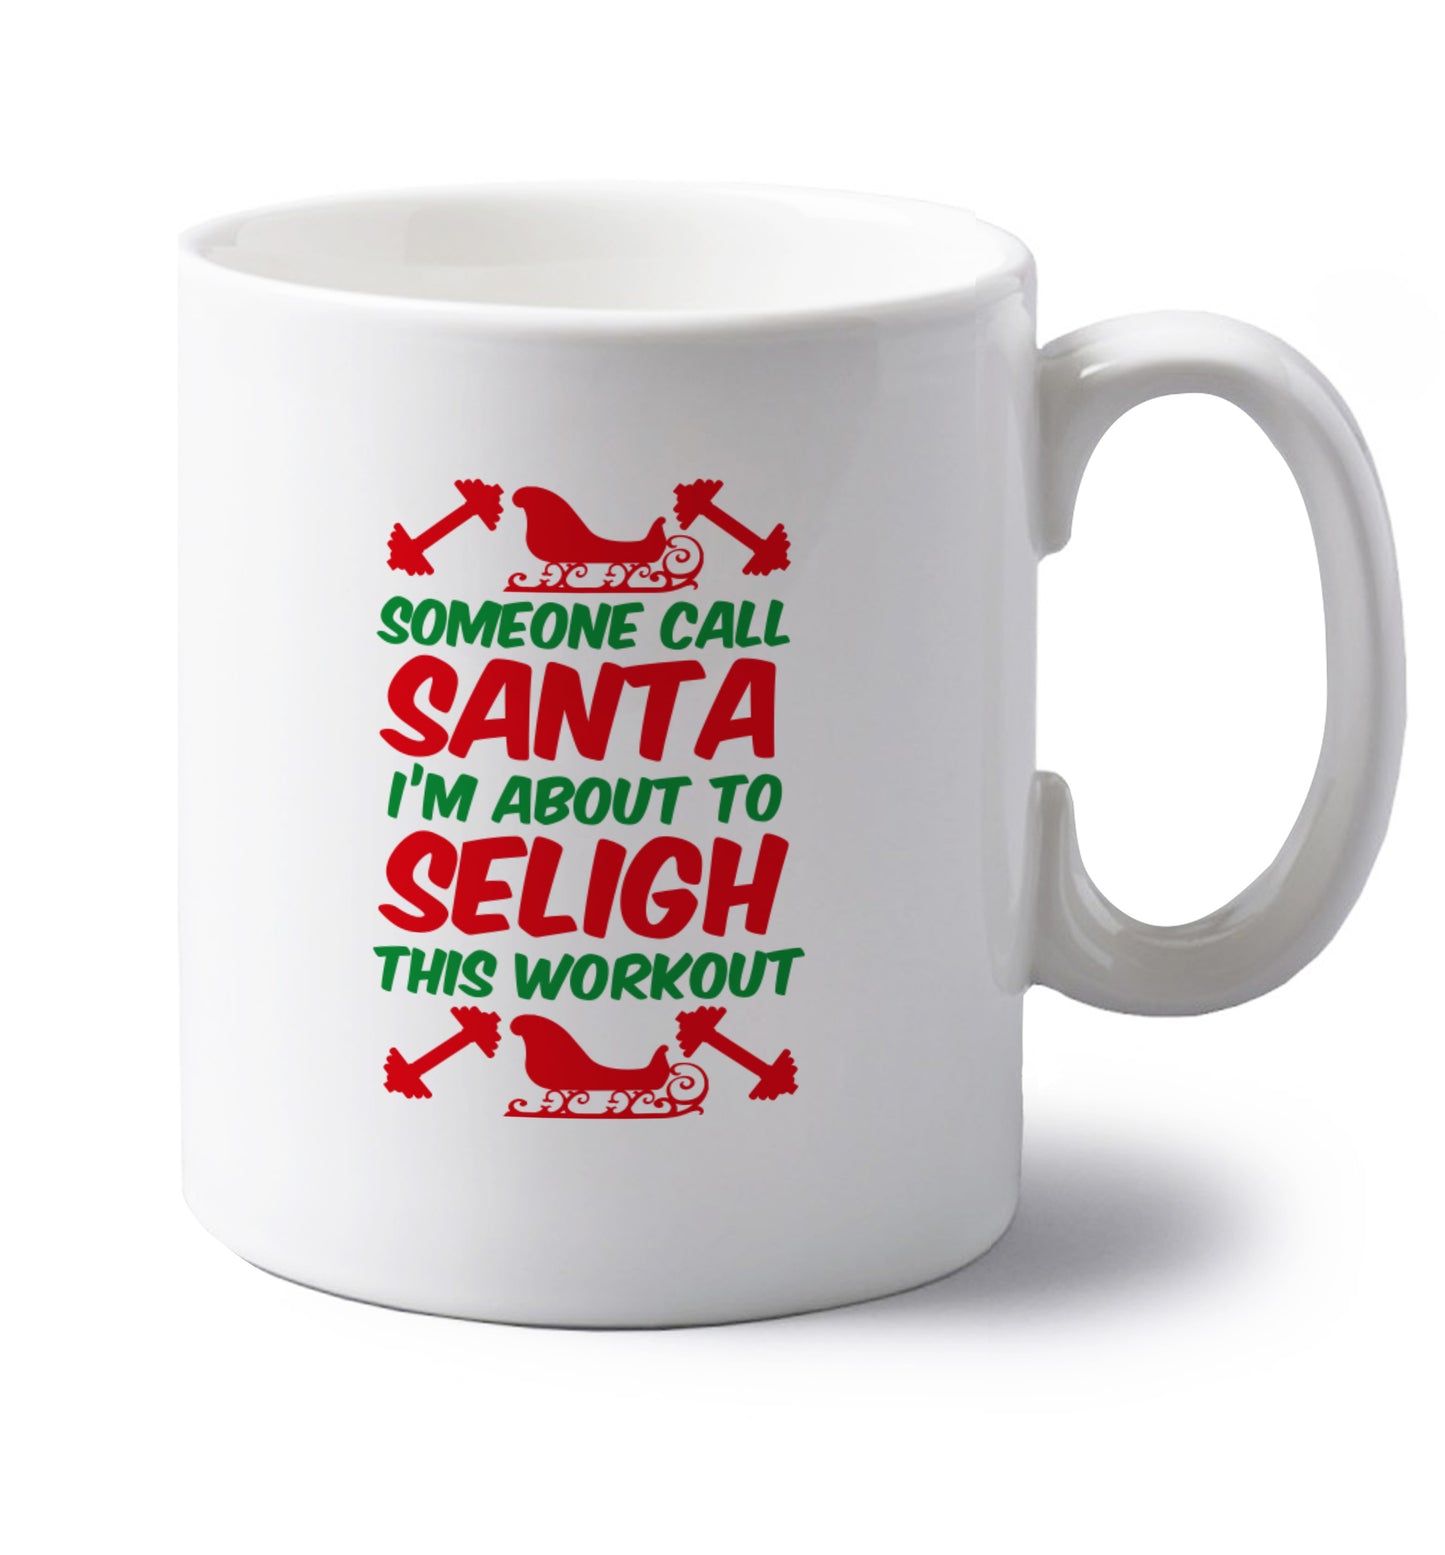 Someone call santa, I'm about to sleigh this workout left handed white ceramic mug 